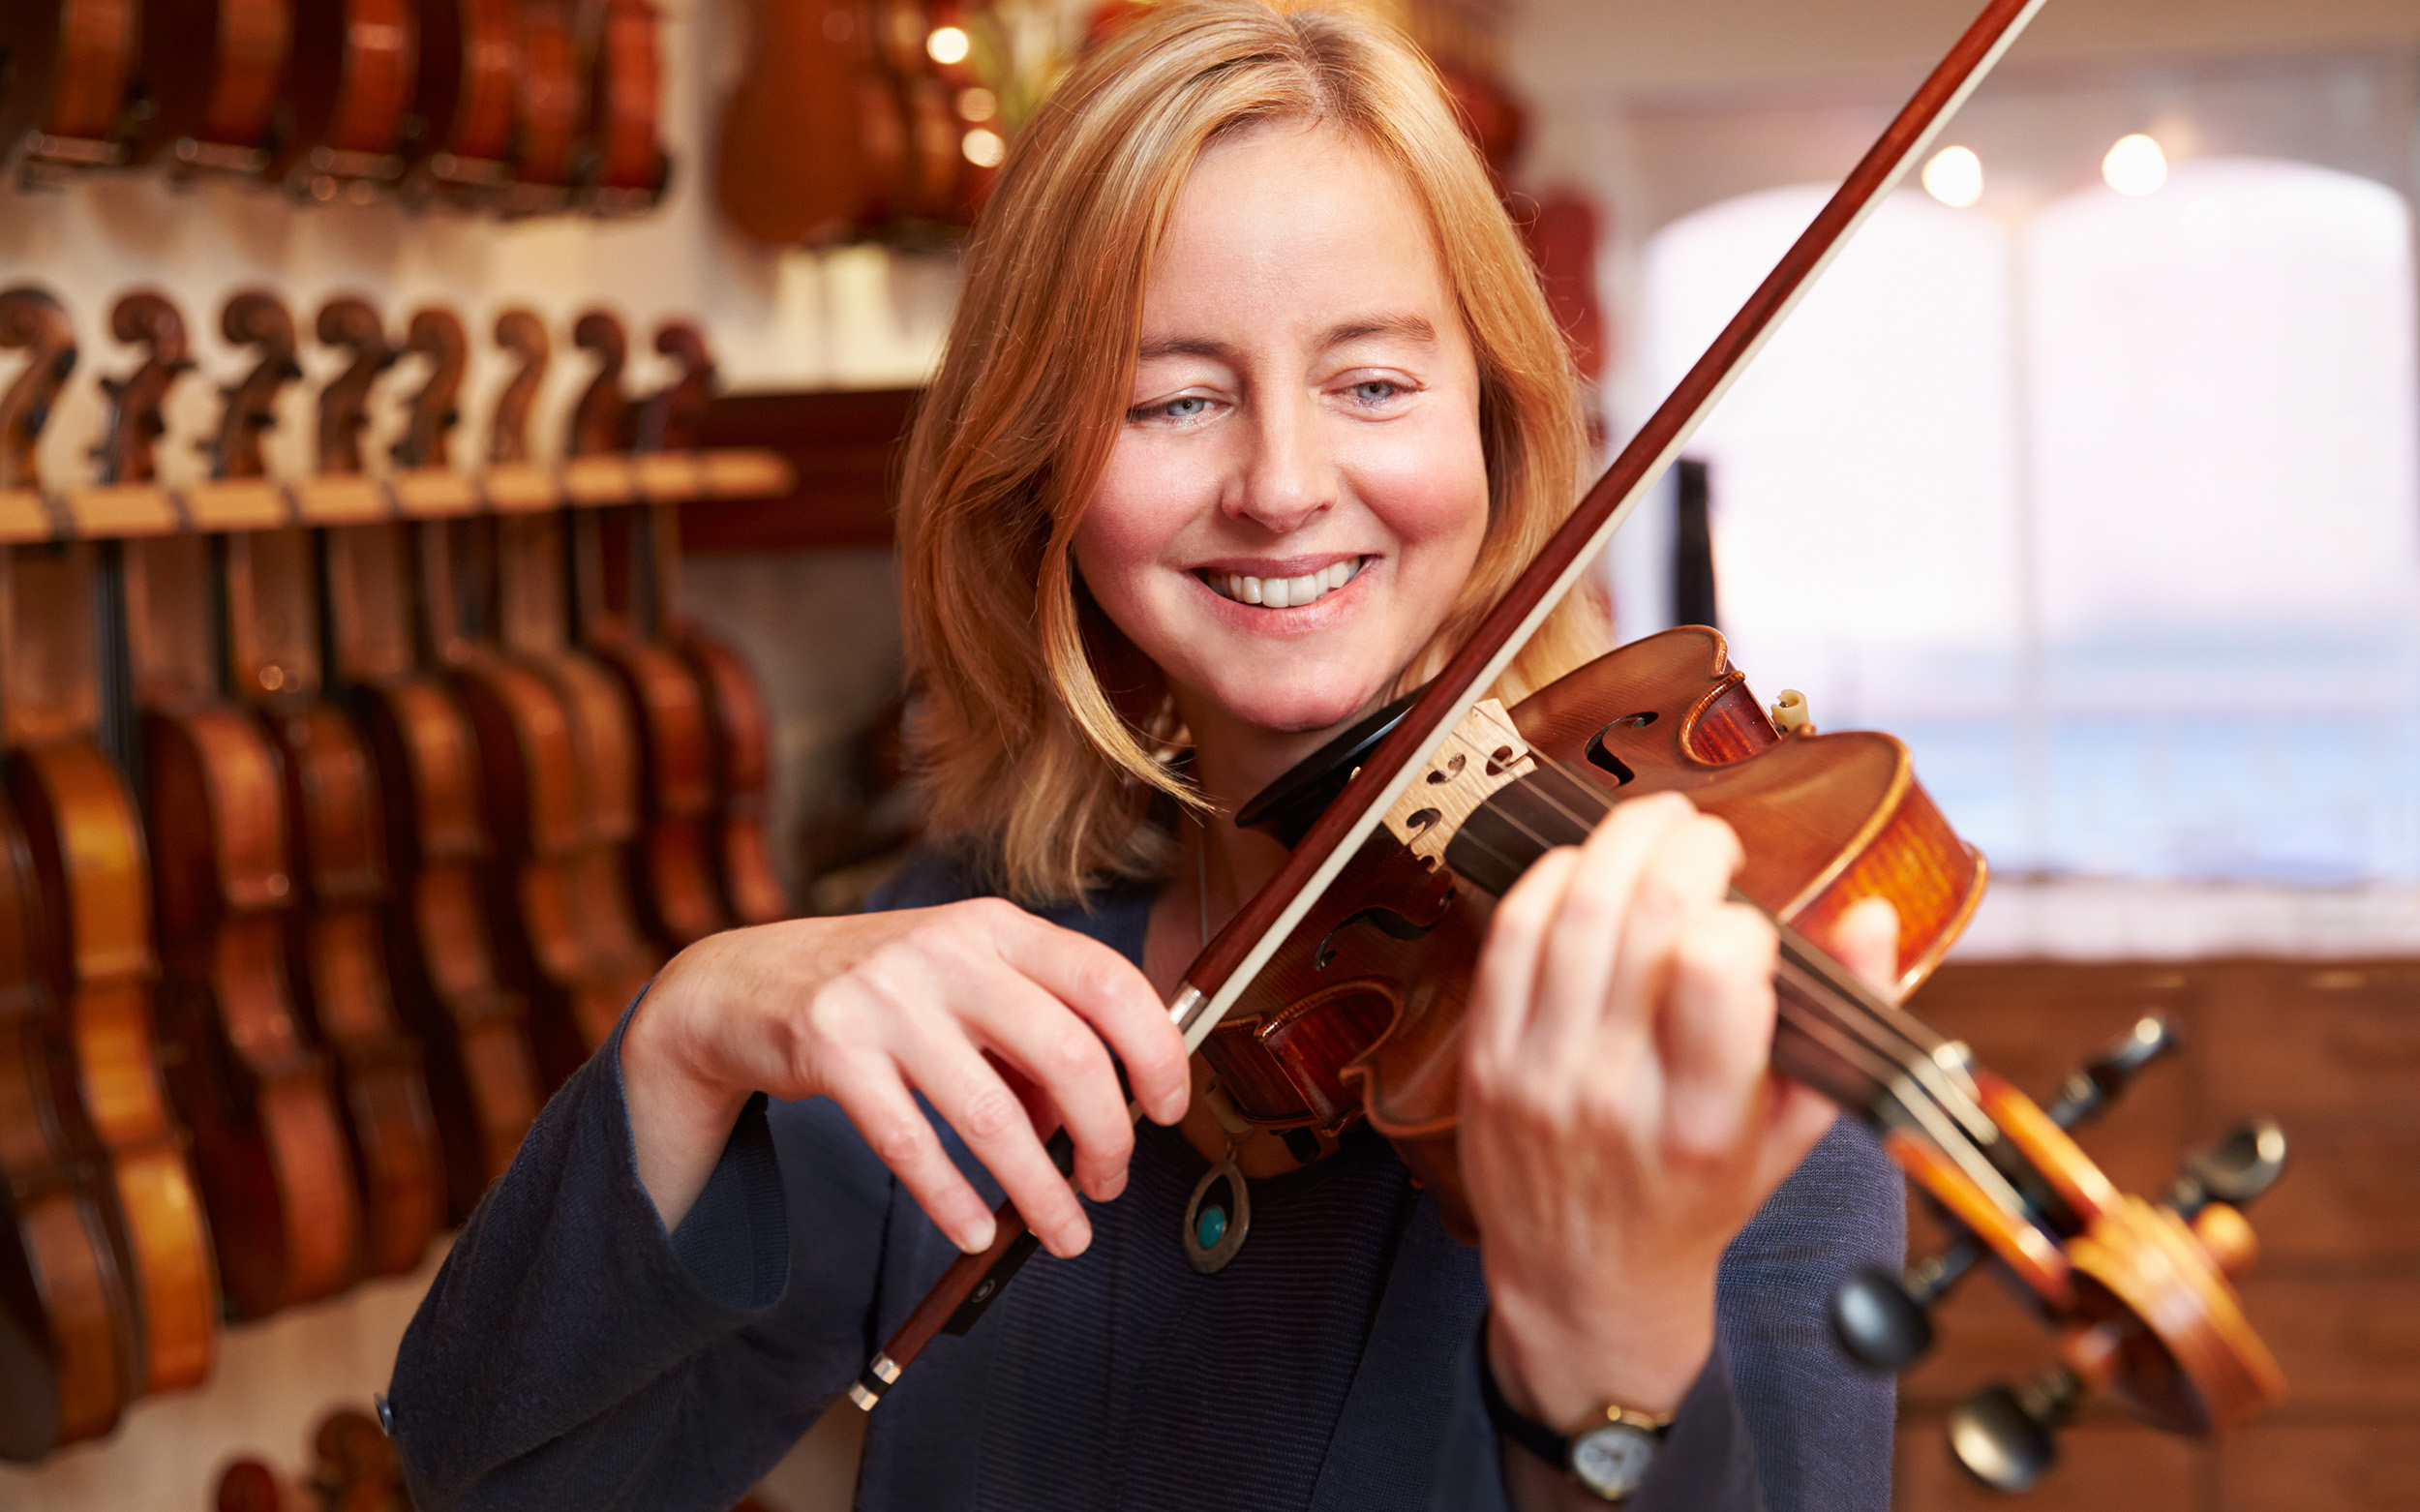 strawberry blond 40-something woman smiling while playing violin with many others in the background